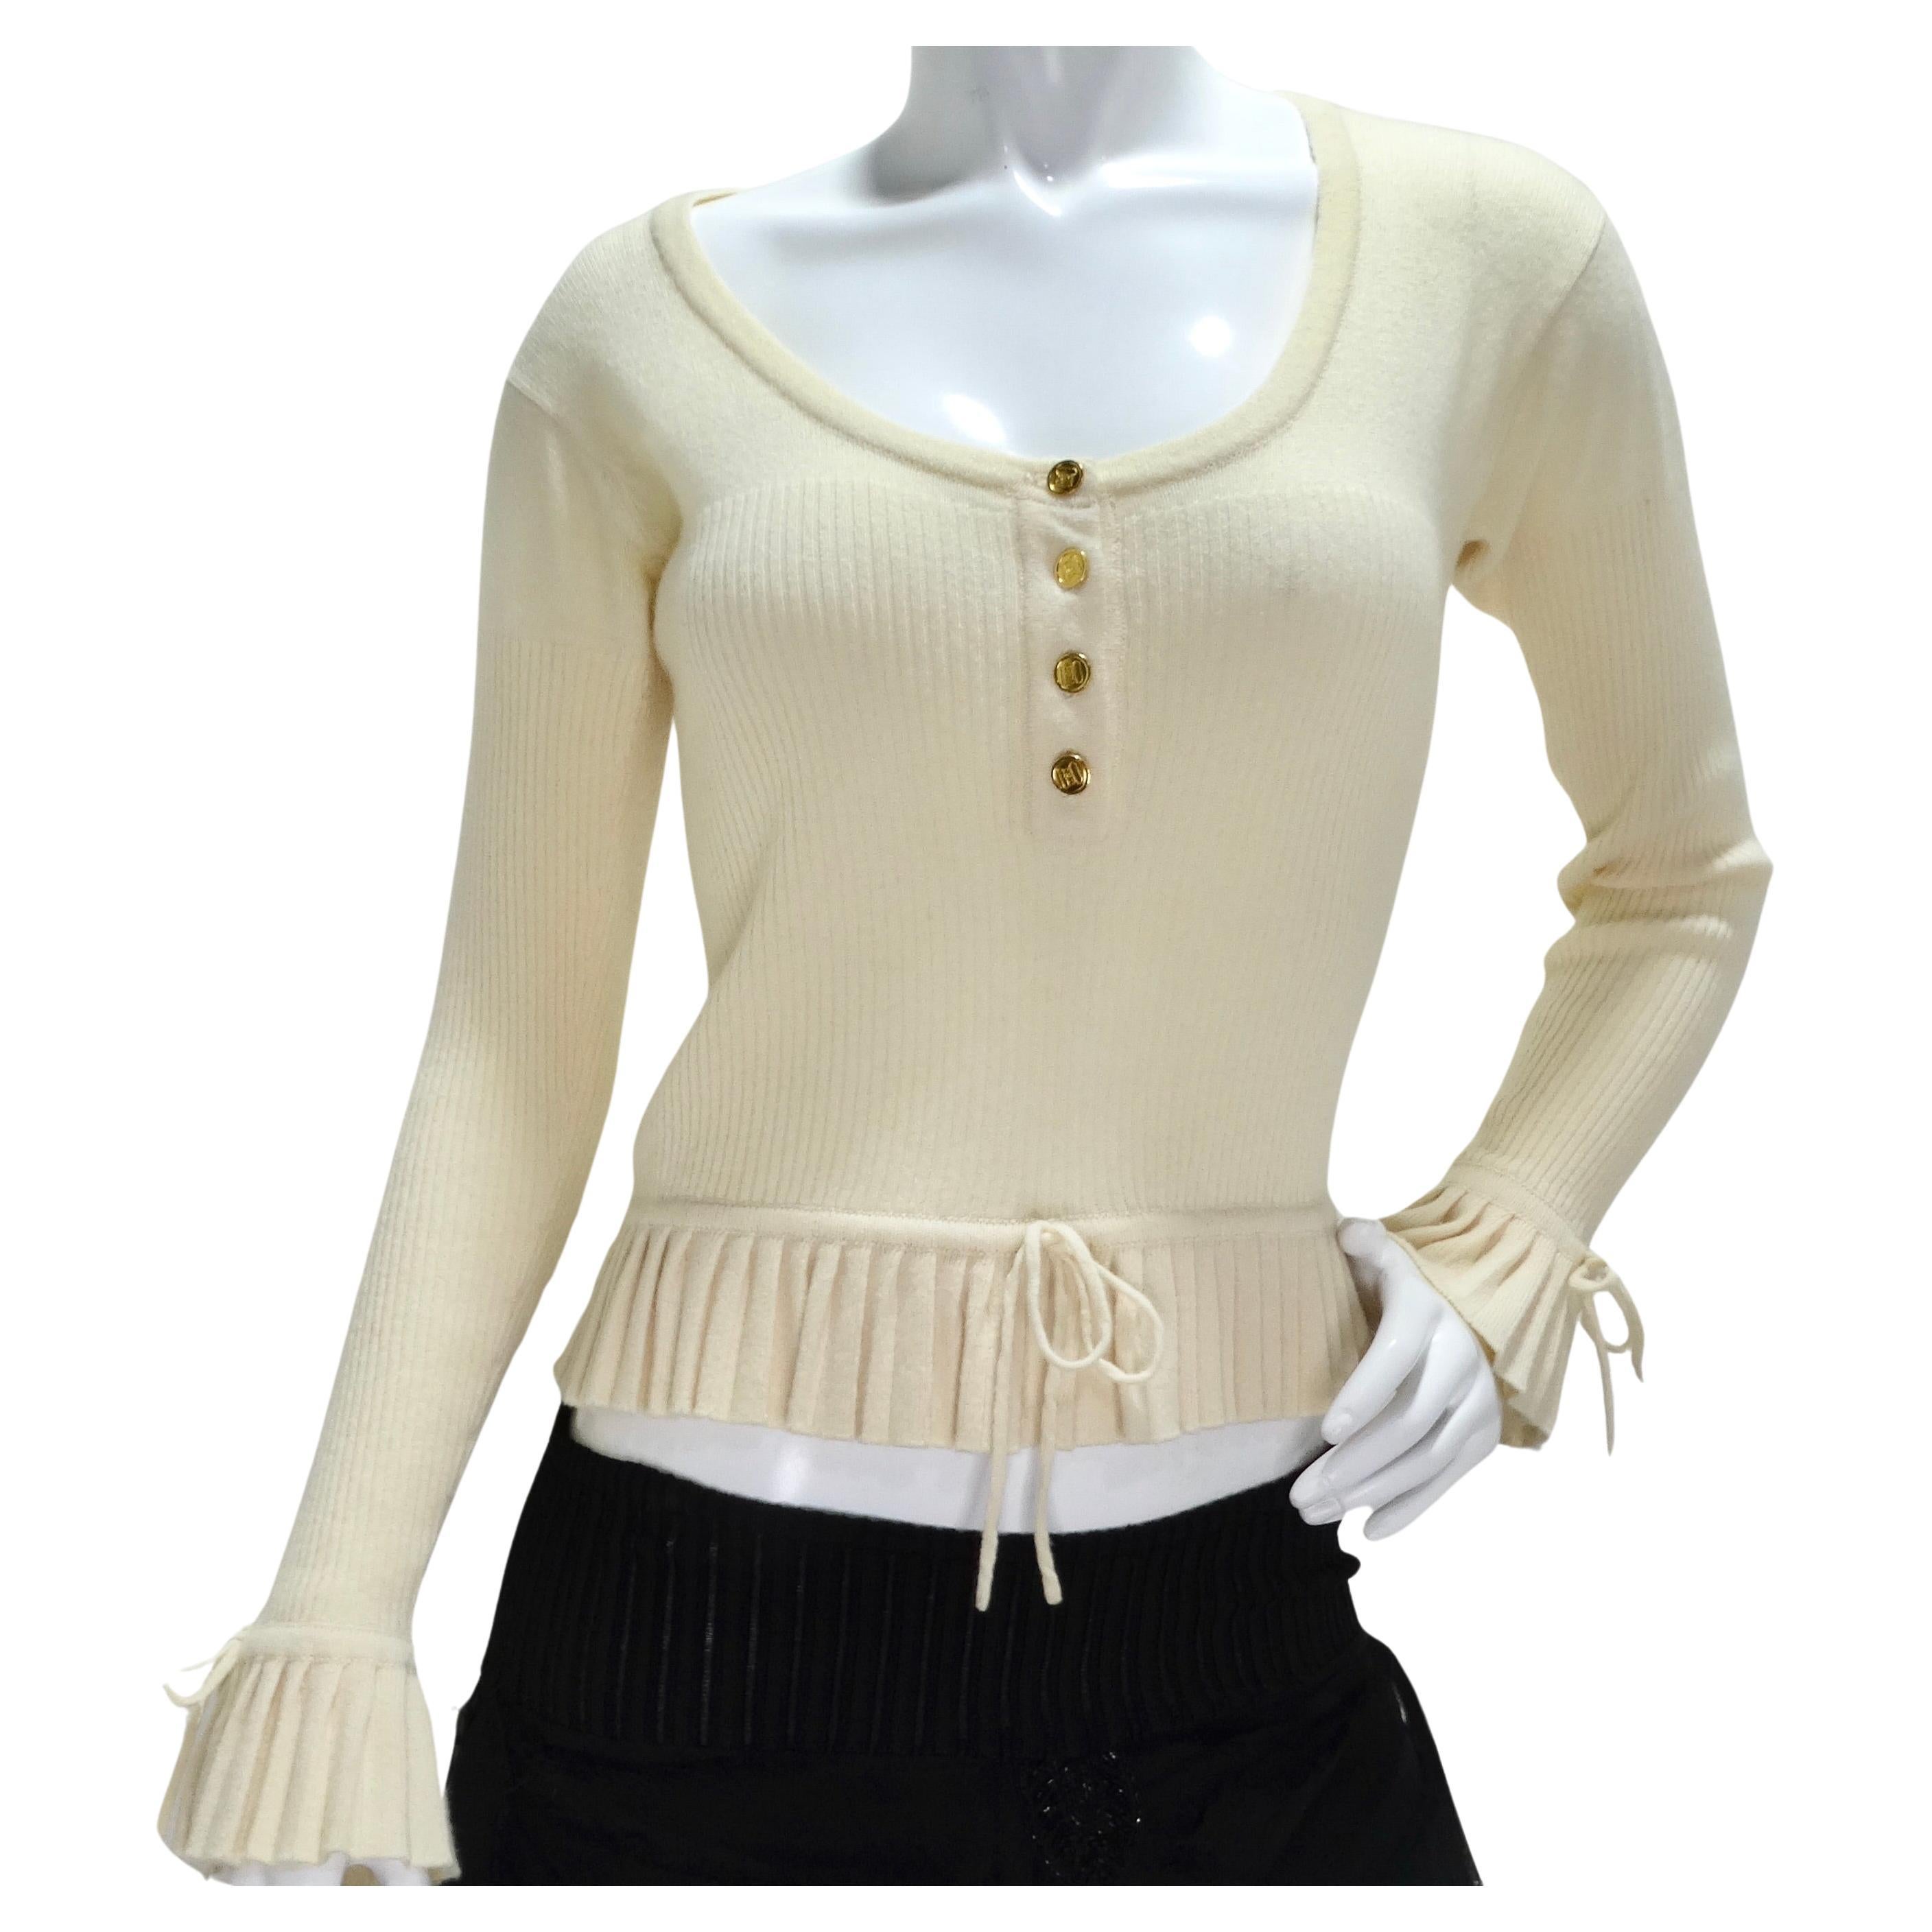 Chanel 1990s Ruffle Trim Tie Knit Cashmere Sweater  For Sale